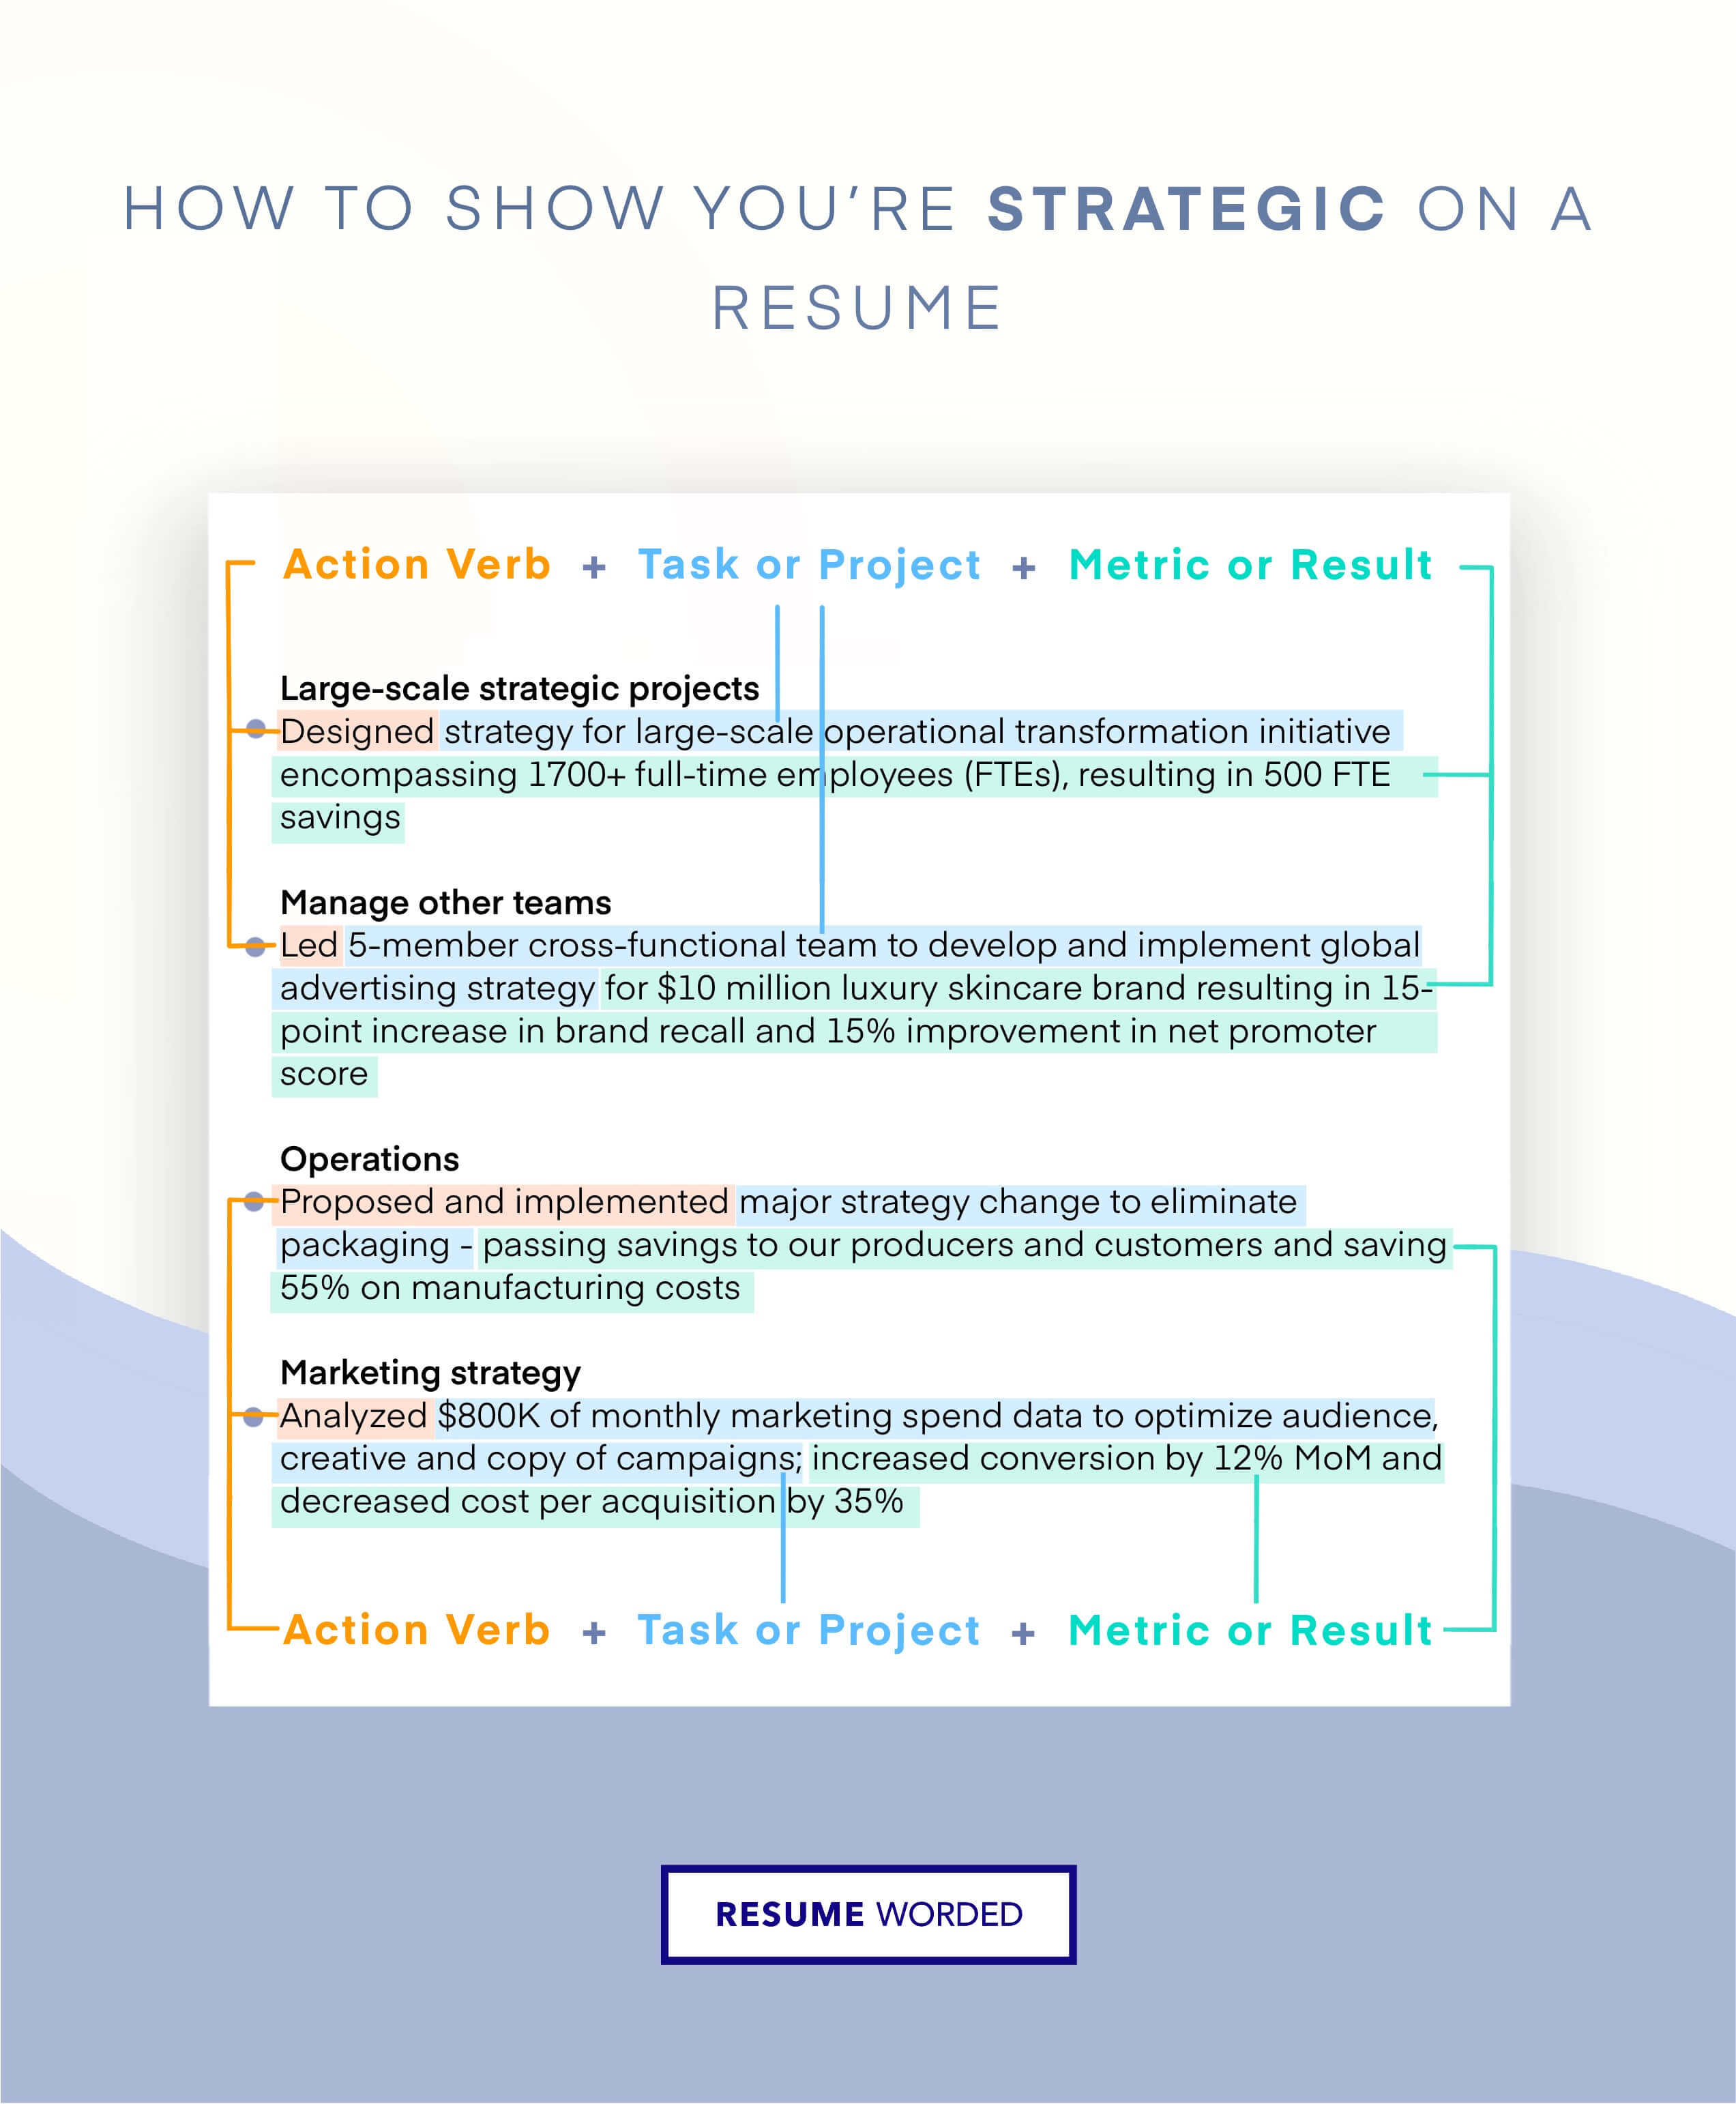 Showcase strategic product vision and results - Director of Product Management CV